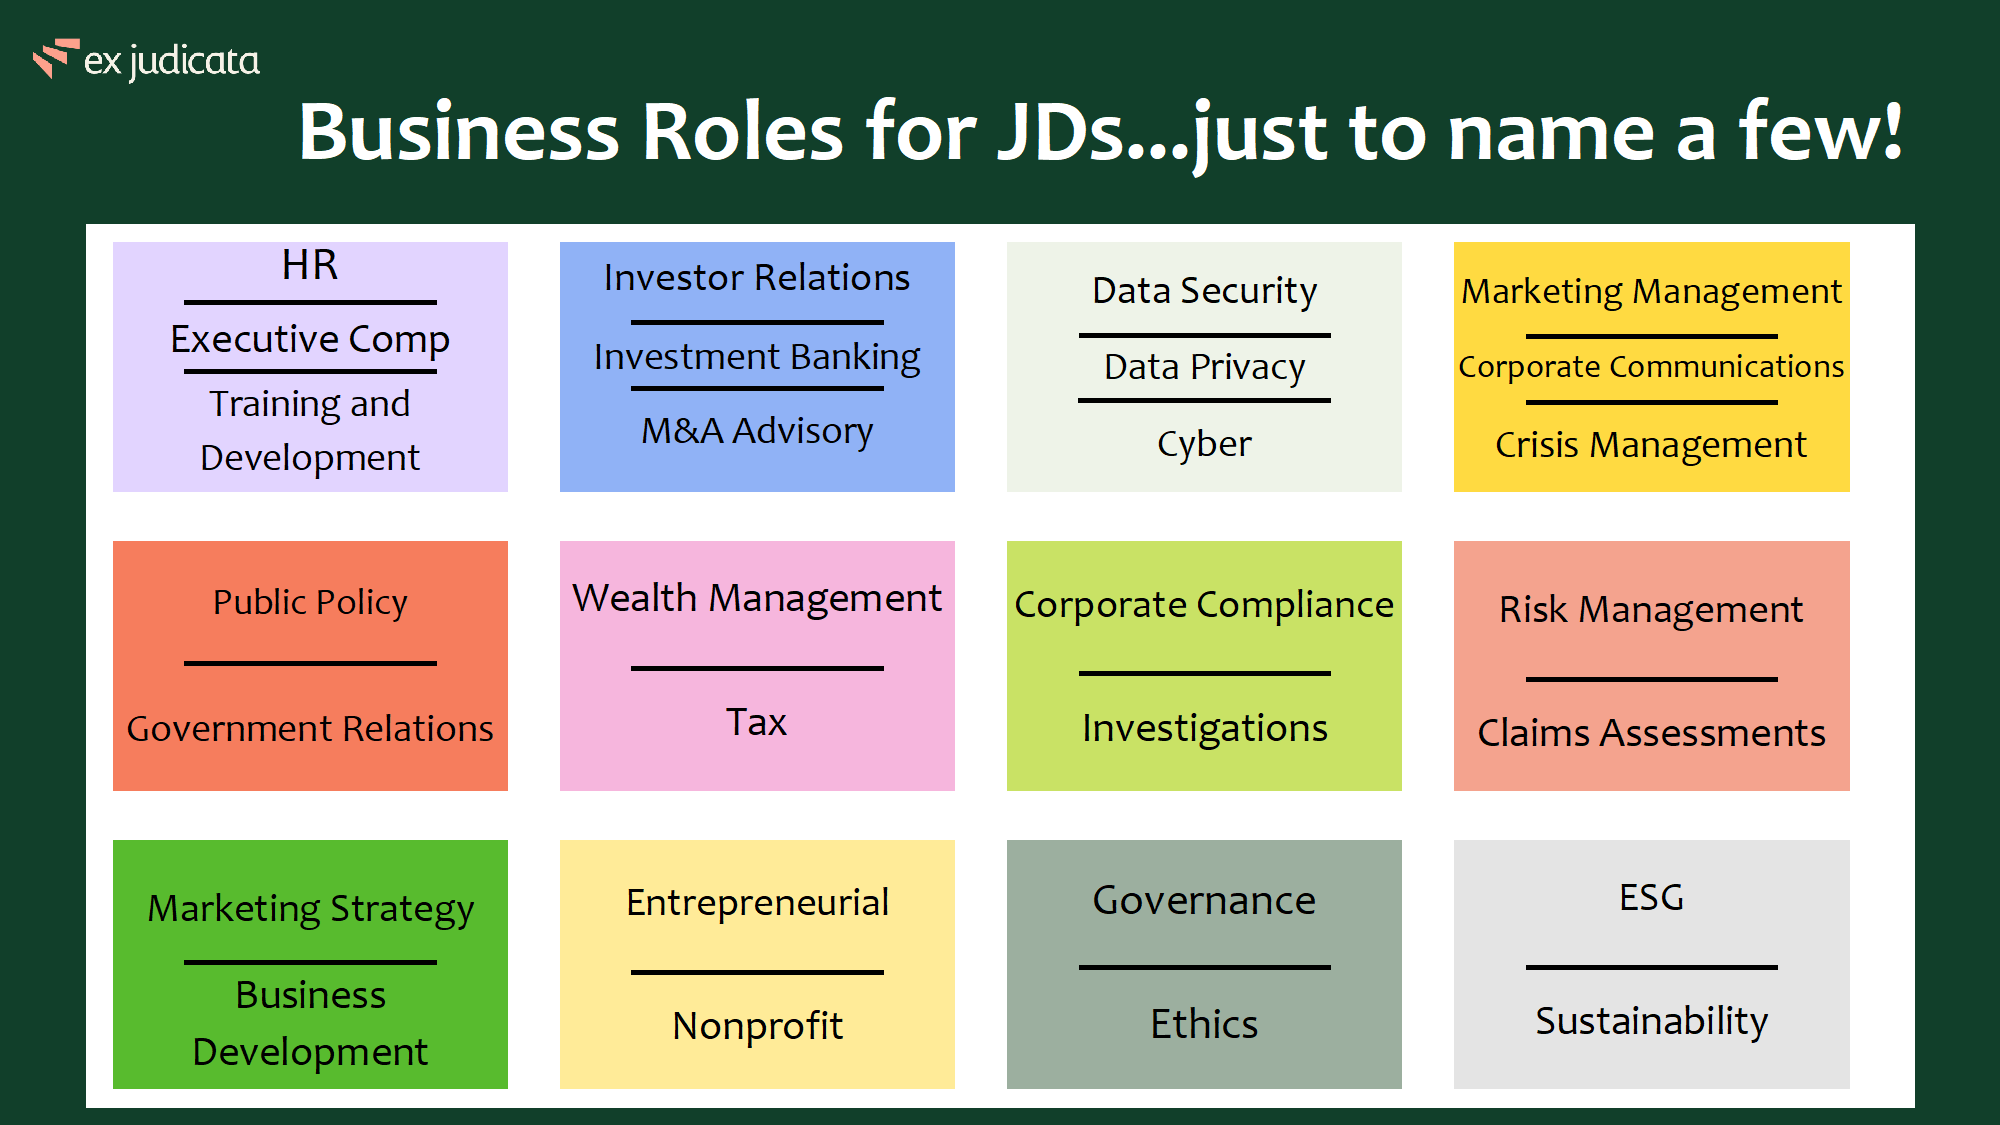 Business Roles for JDs...just to name a few!